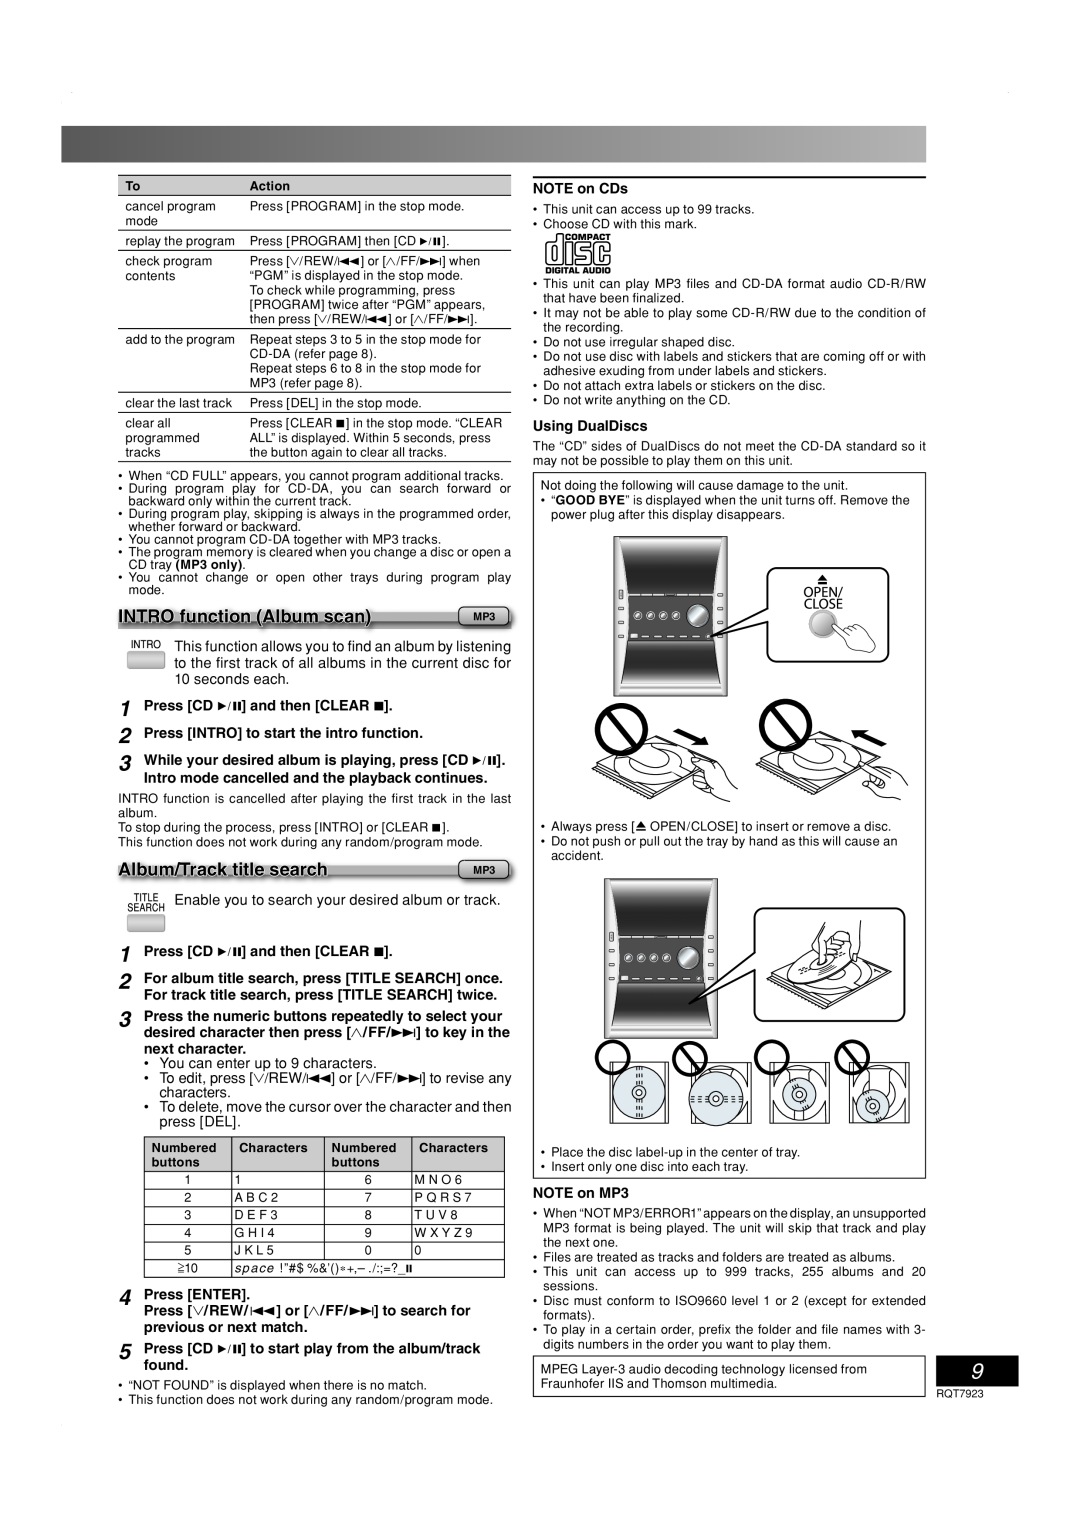 Panasonic SC-PM313 important safety instructions INTRO function Album scan, Album/Track title search 